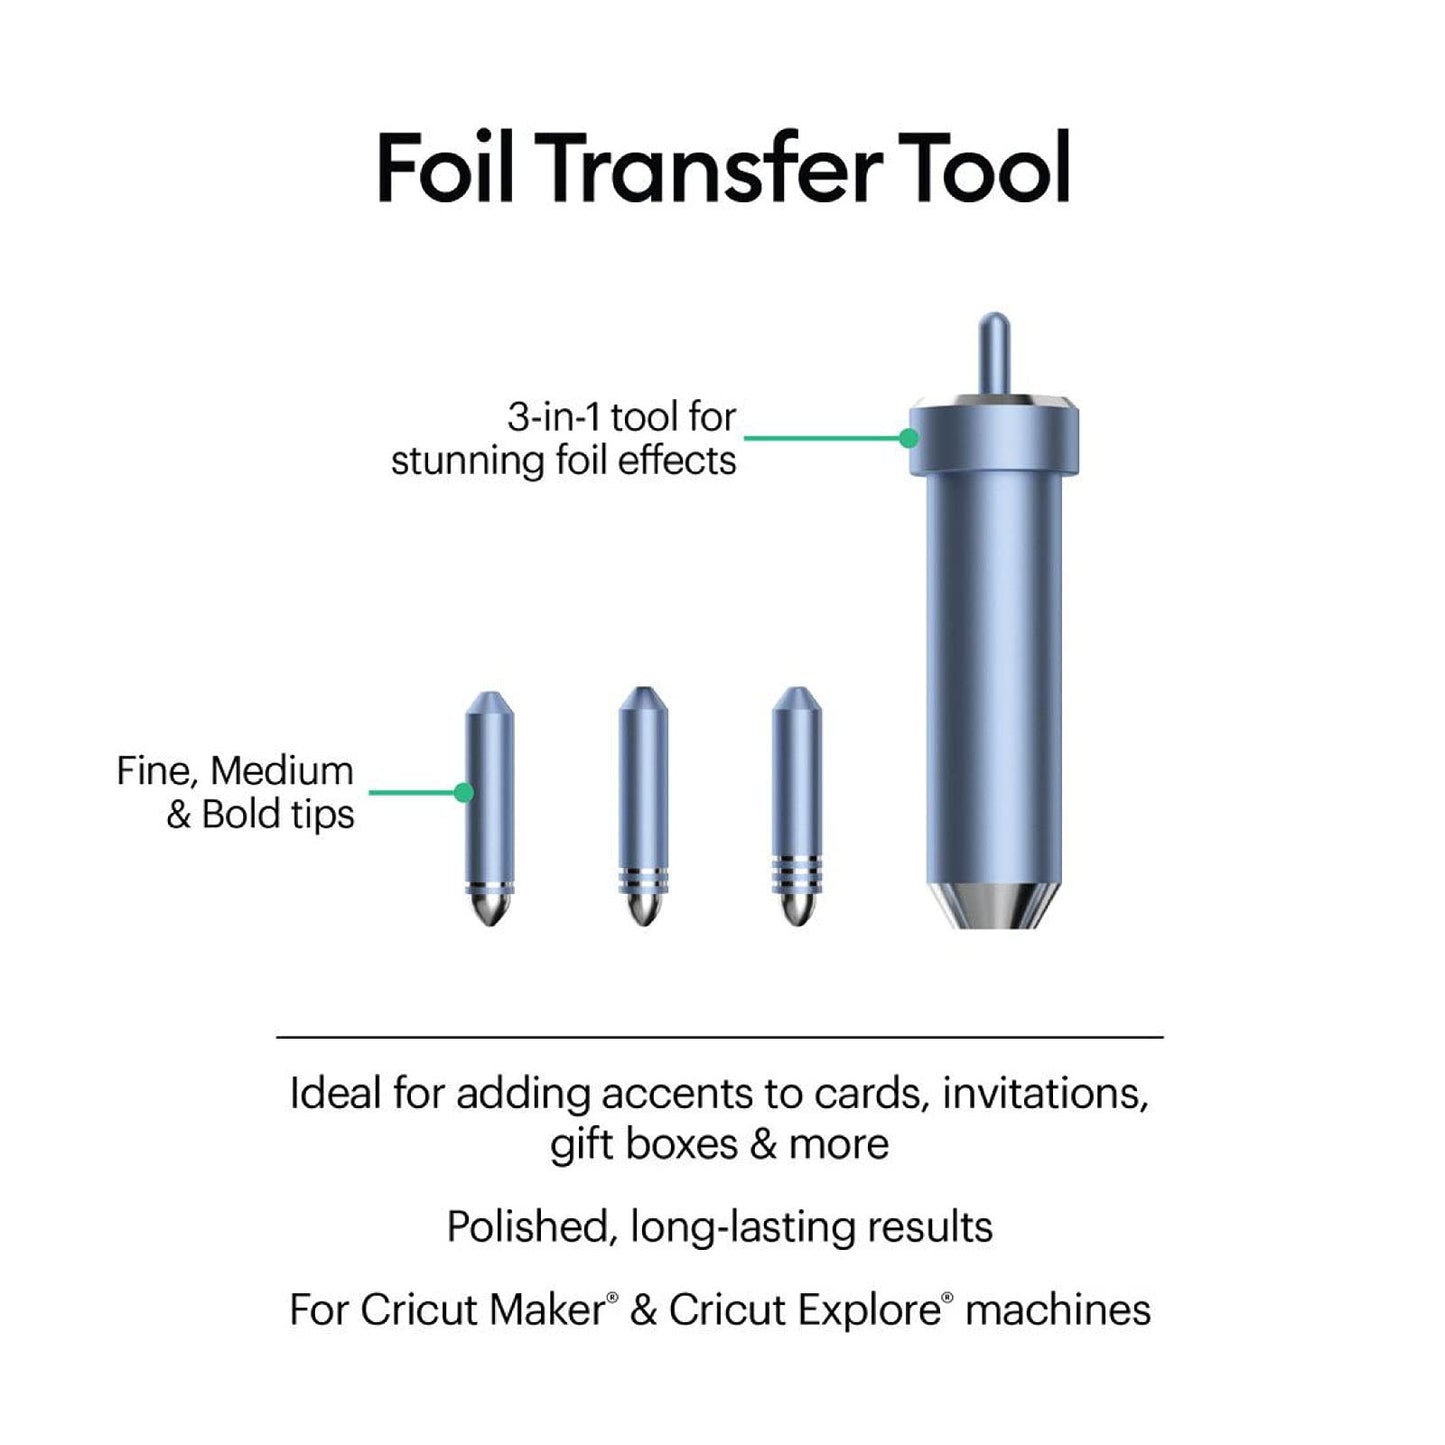 Cricut Foil Transfer Kit, Includes 12 Foil Transfer Sheets, 3 Cricut Tools in 1 with Interchangeable Tips (Fine, Medium & Bold), Tool Housing &